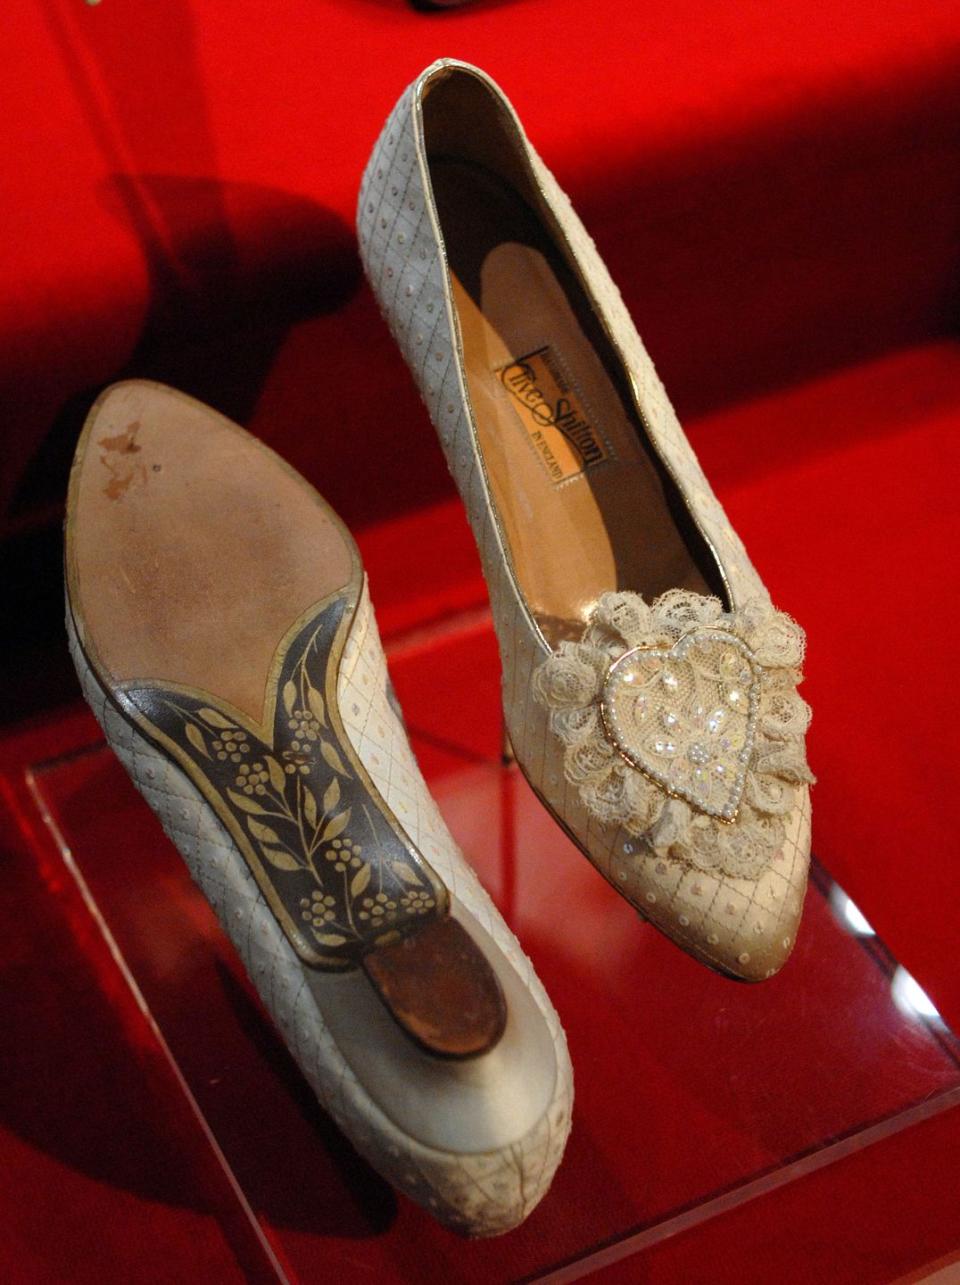 8) Her shoes took six months to make.